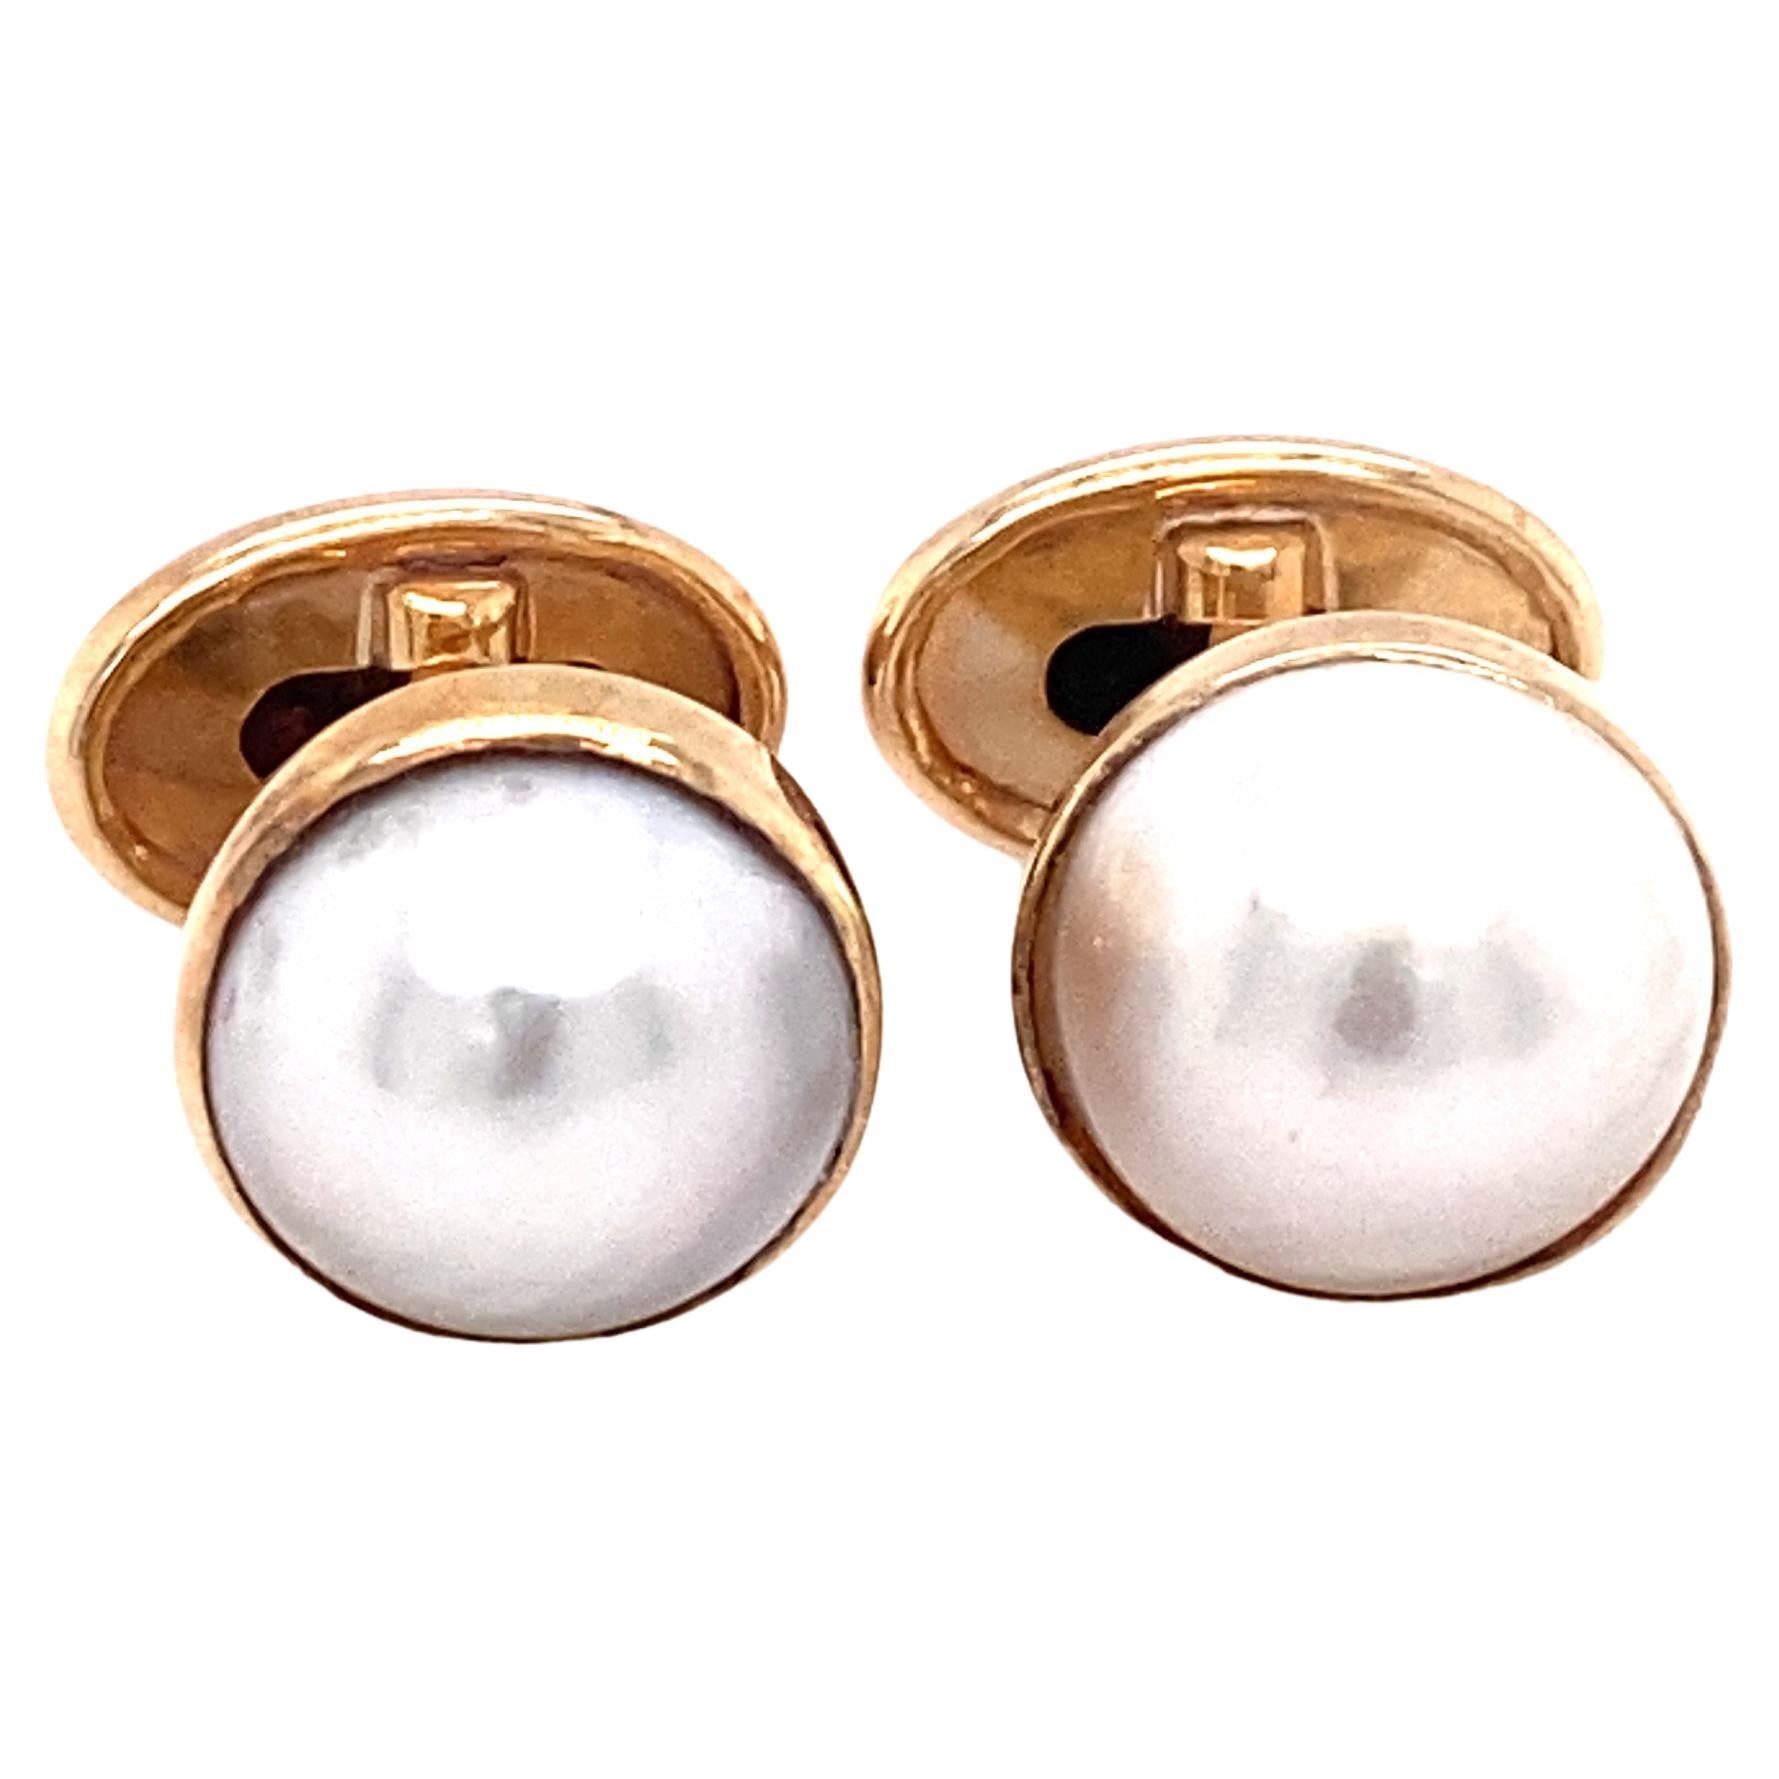 Le Vian Mabe Pearl Cuff Links in 14K Gold